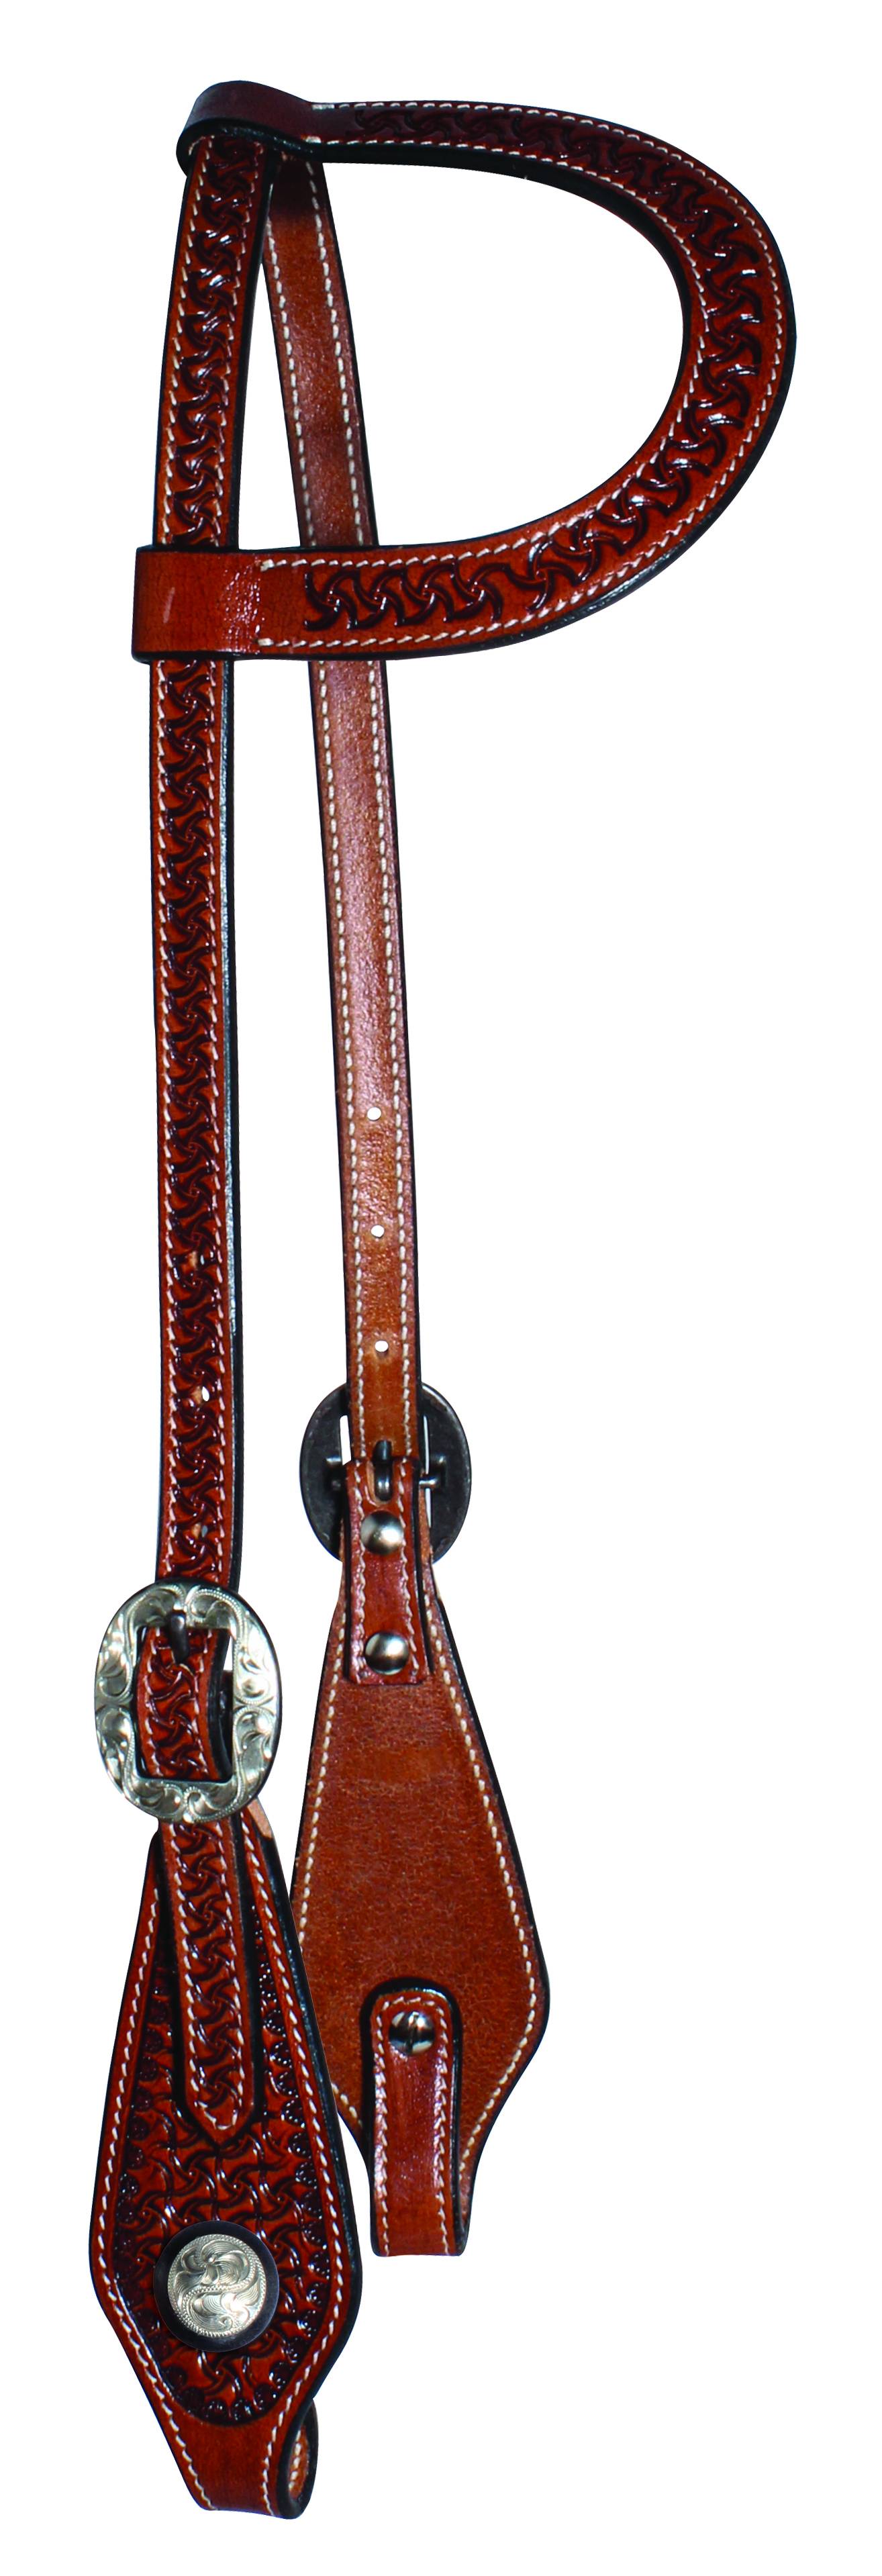 Professionals Choice Windmill Collection Single Ear Headstall